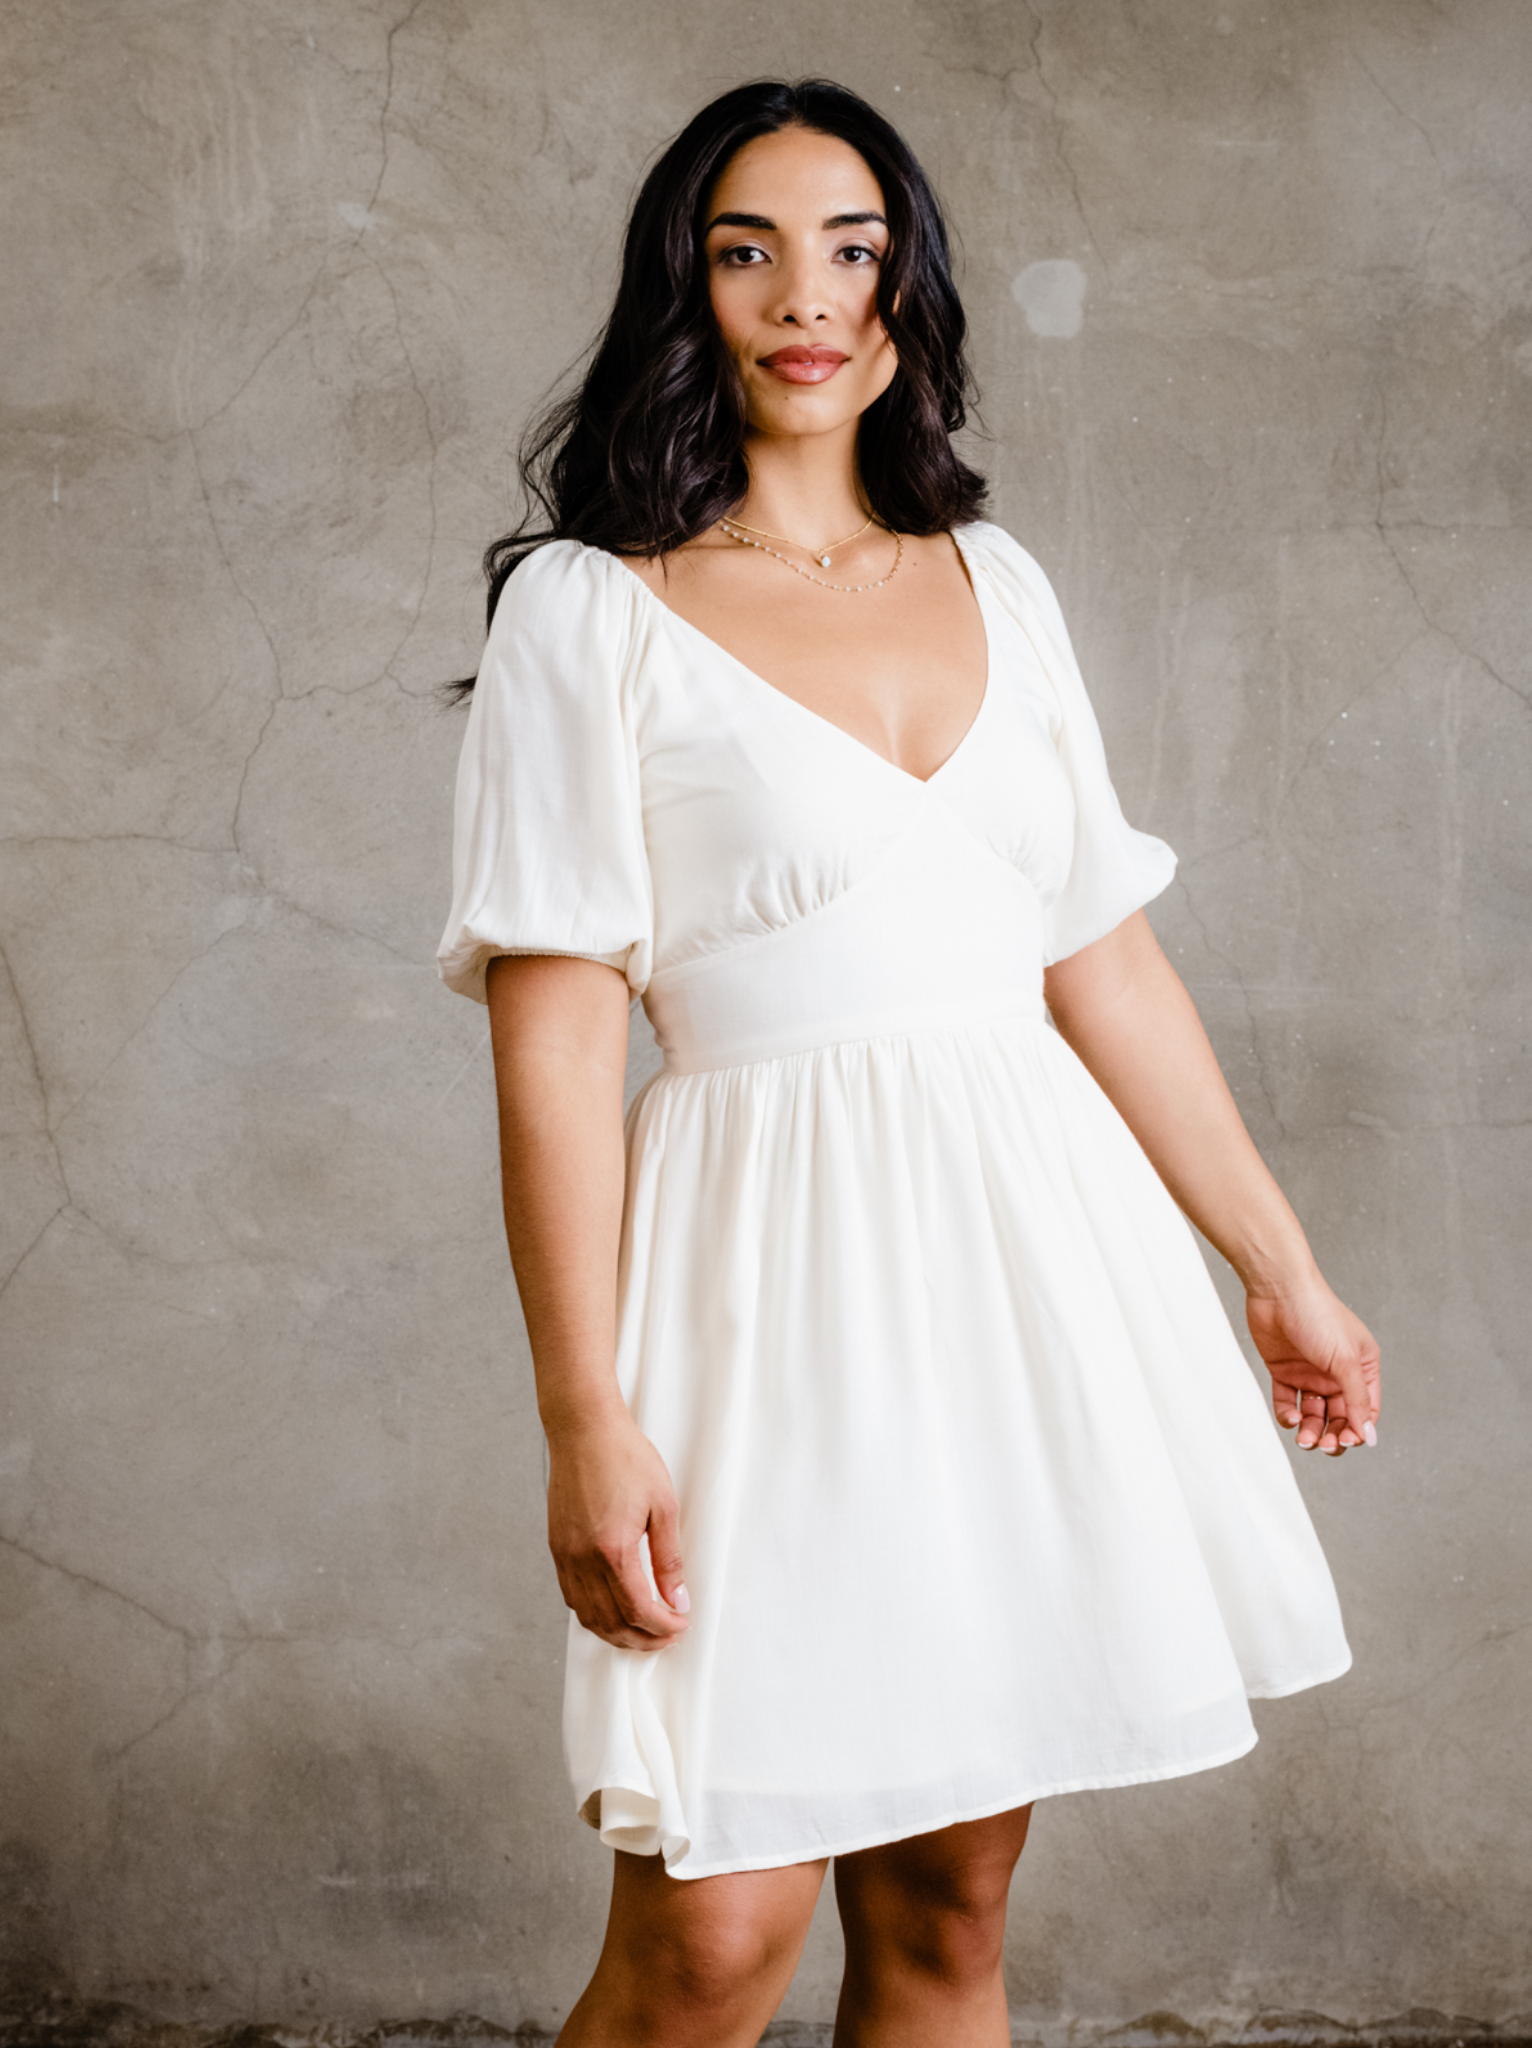 beautiful sustainable white dress perfect for summer and summer vacation